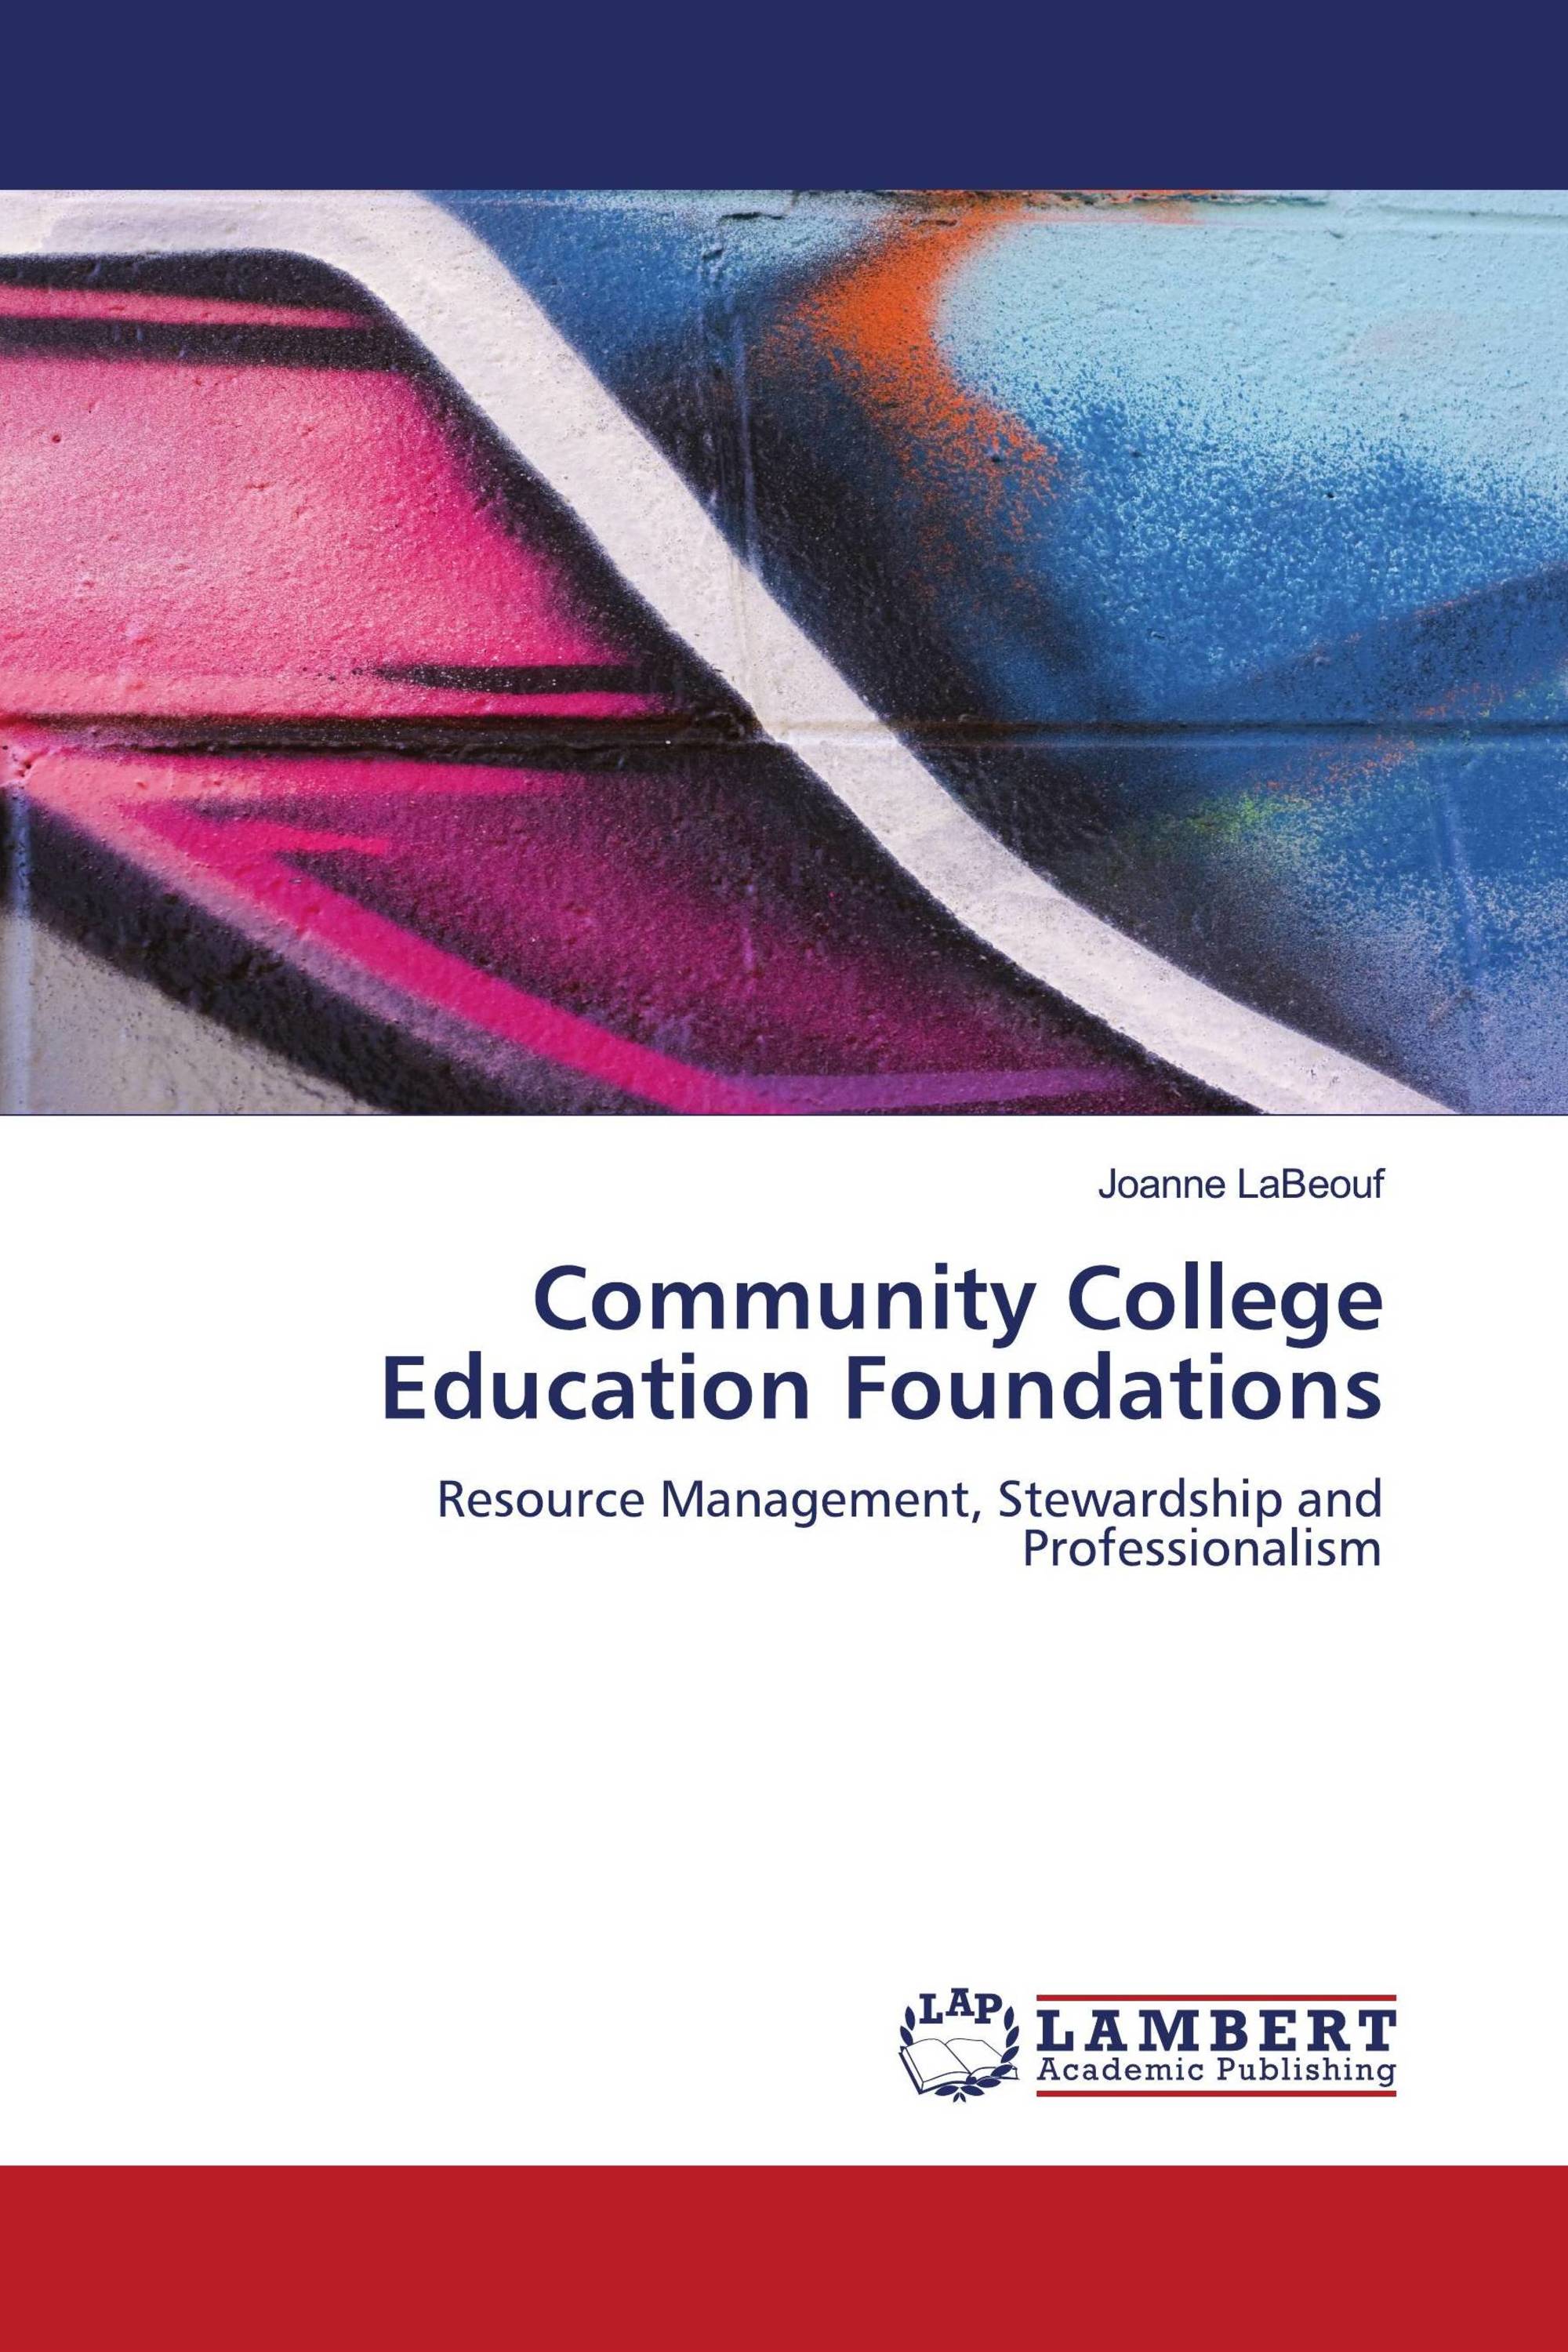 Community College Education Foundations